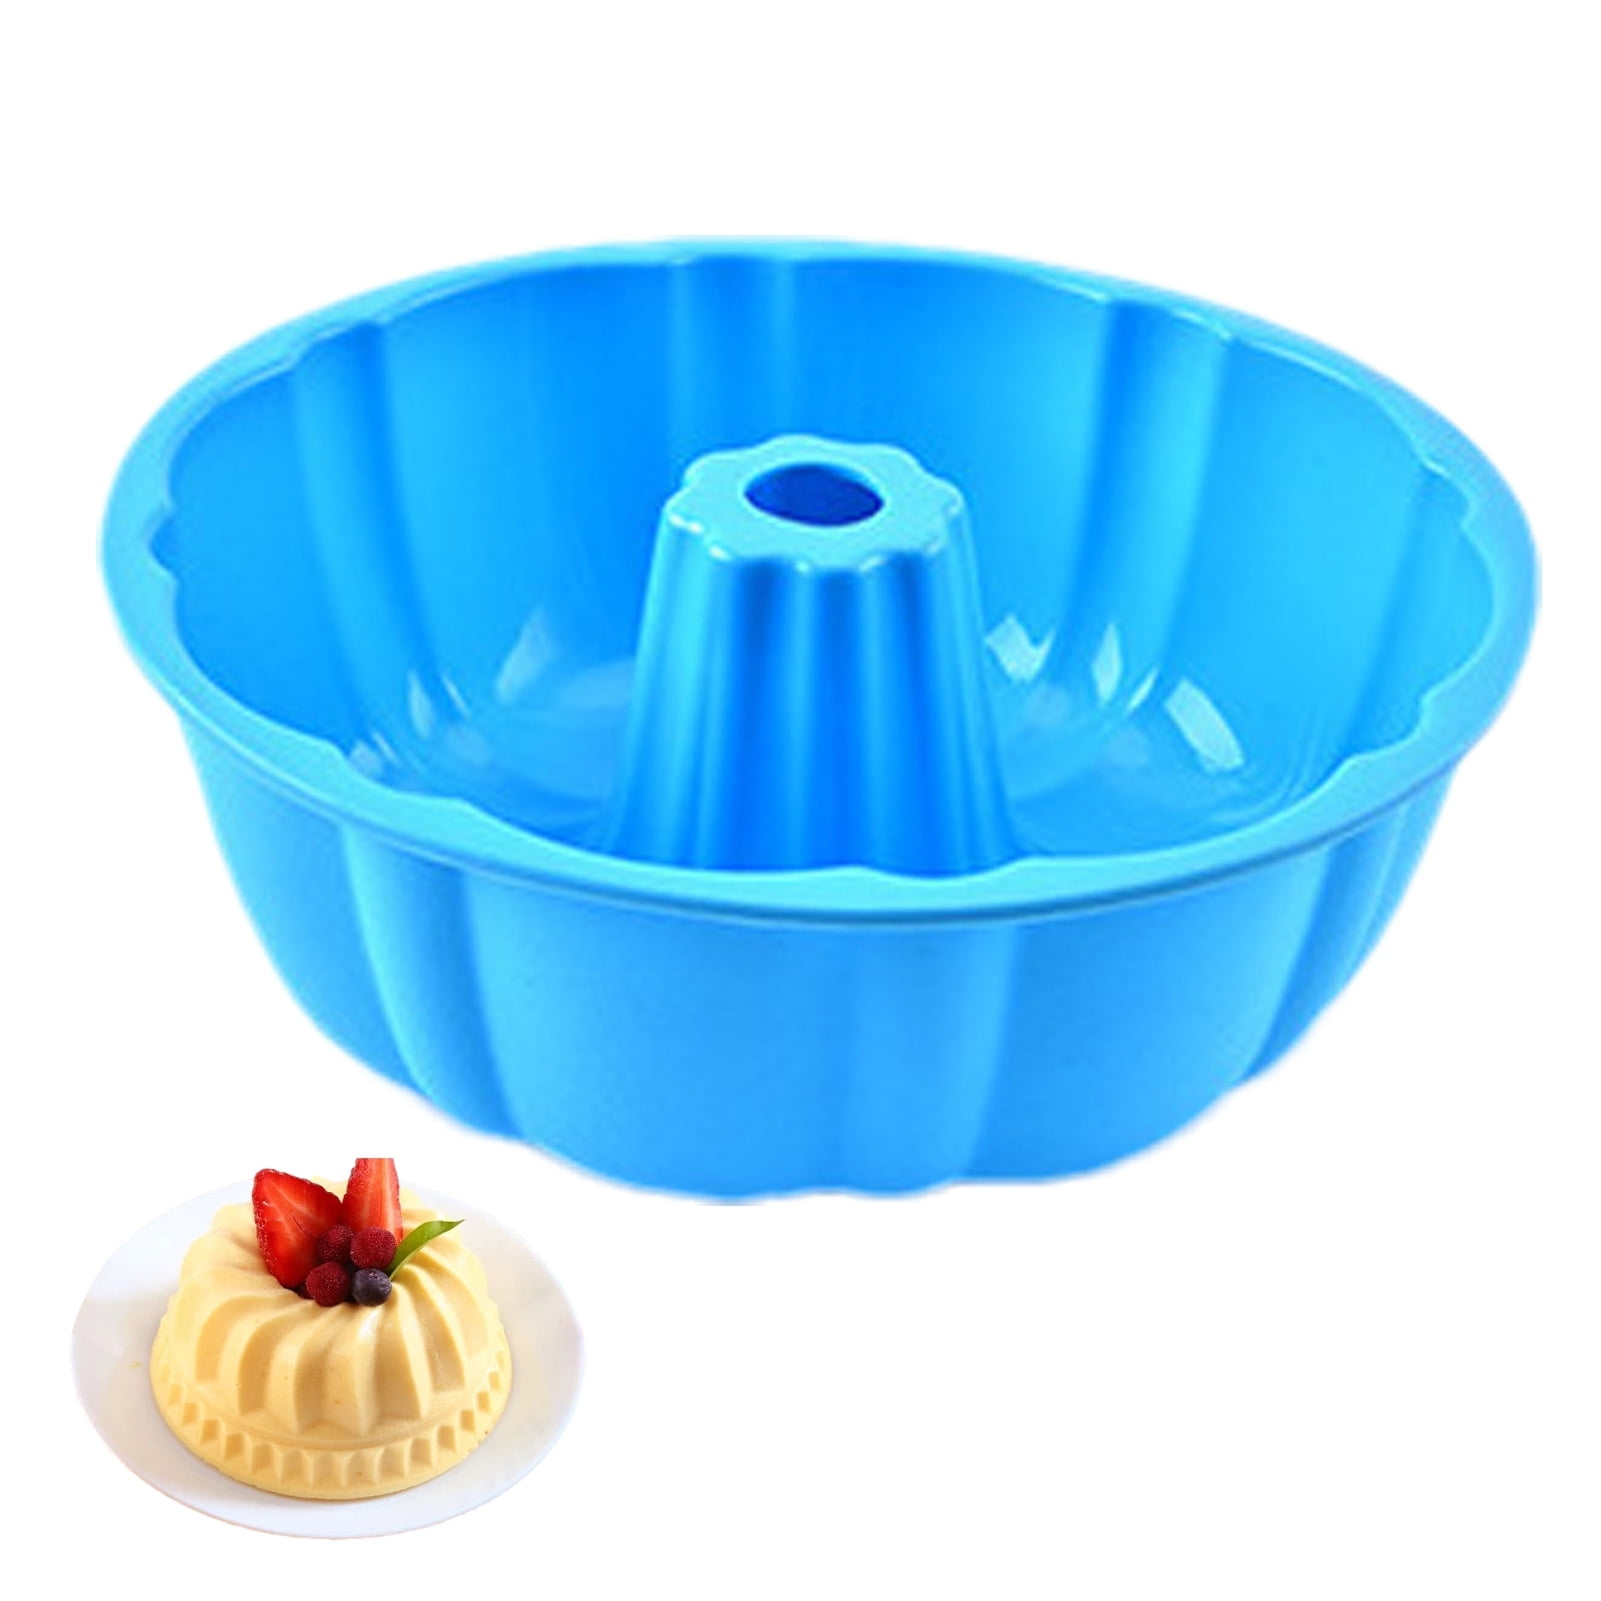 Joyeee 8.7'' Castle Christmas Cake Mold Pan, Silicone Baking Mold for  Birthday Cake, Muffin, Bread, Pie, Flan, Tart, Mousse, Non-Stick Baking  Trays